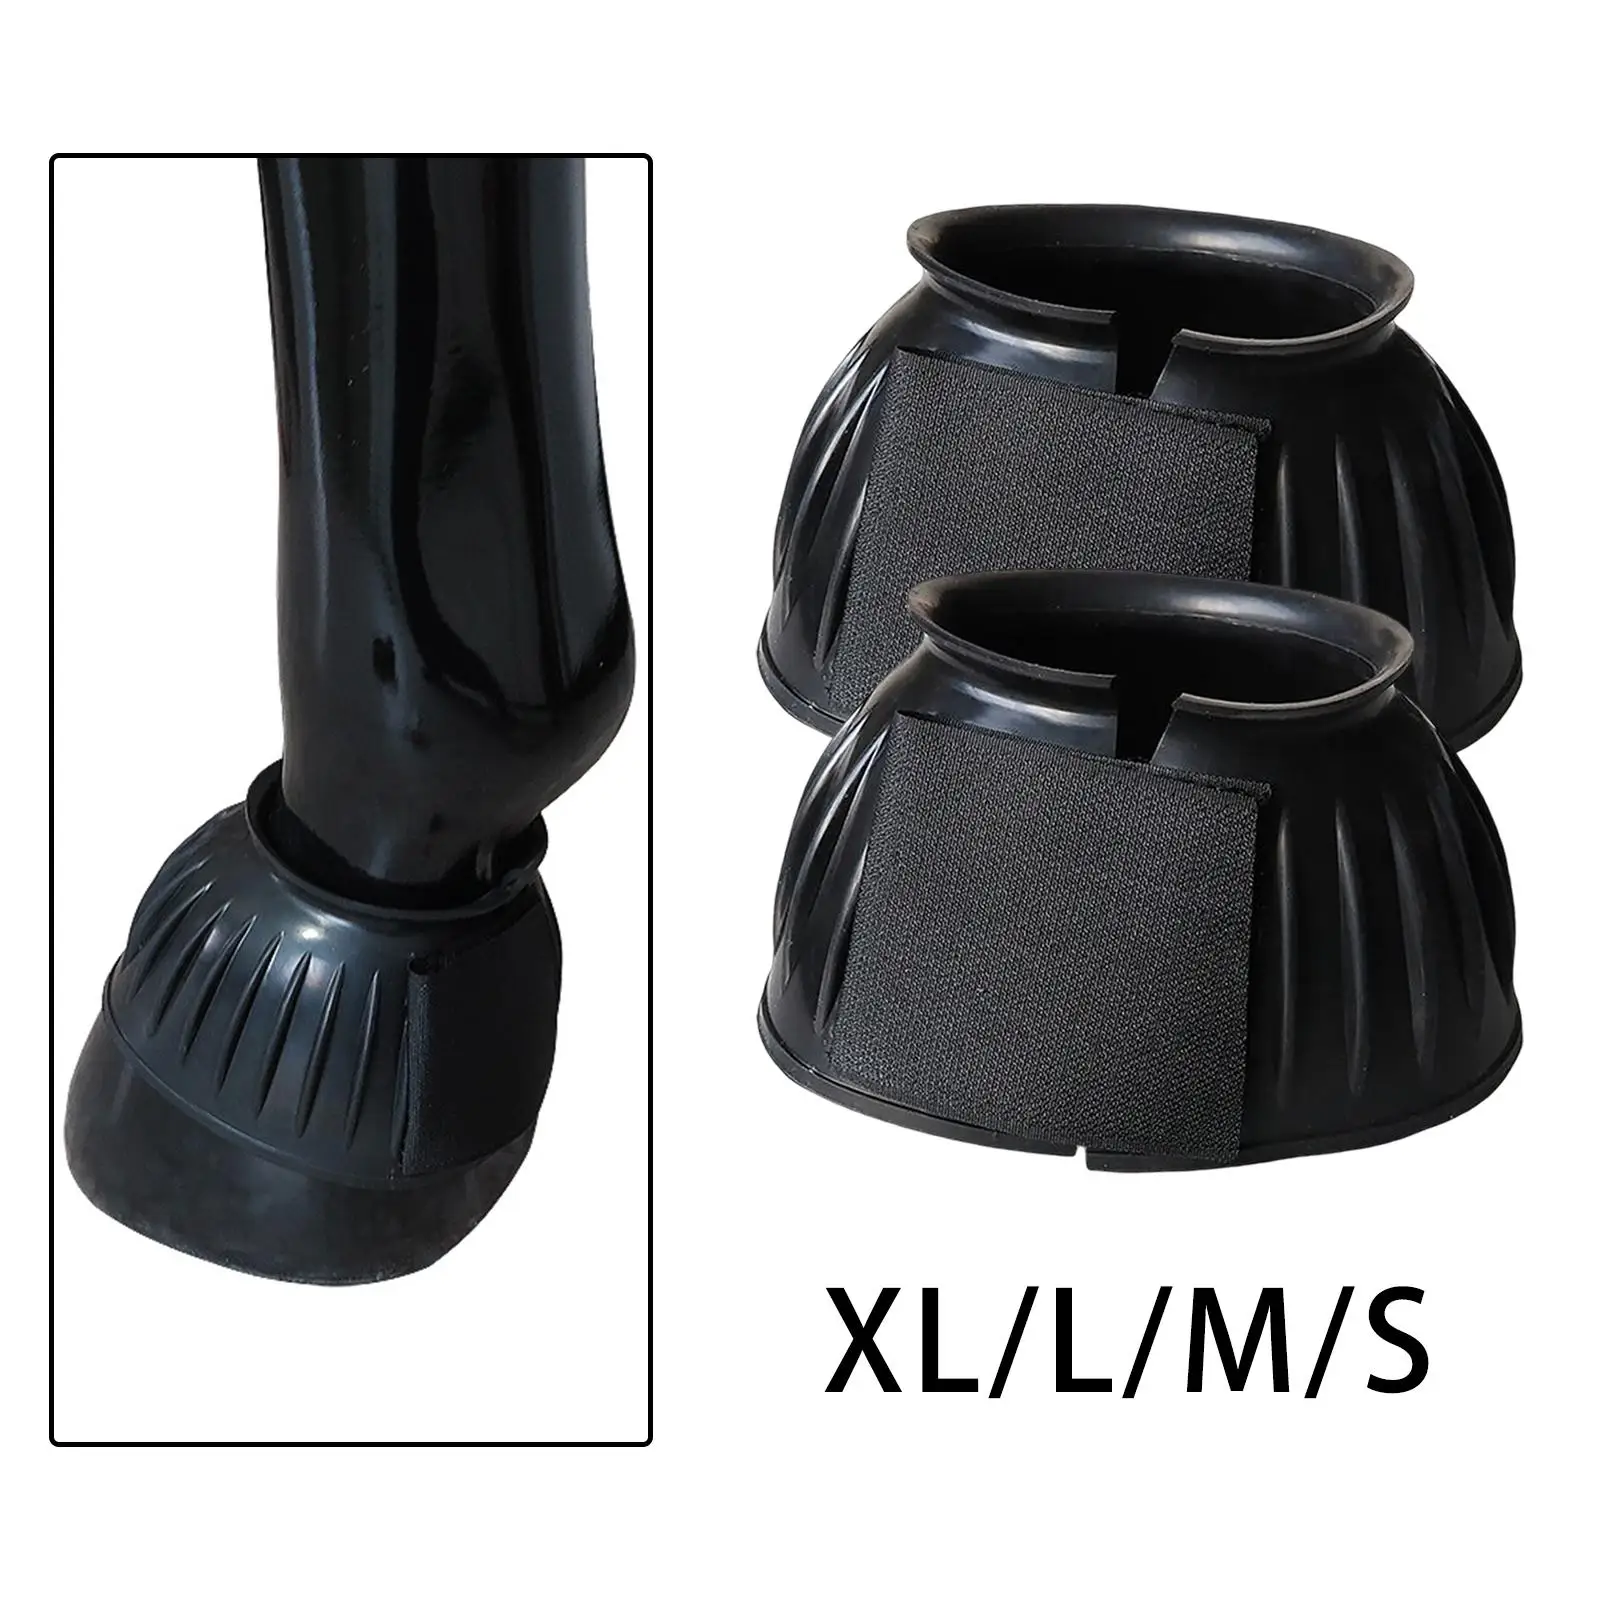 2x Horse Bell Boots Overreach Boot Durable Hoof Protector for Horses Equestrian Equipment